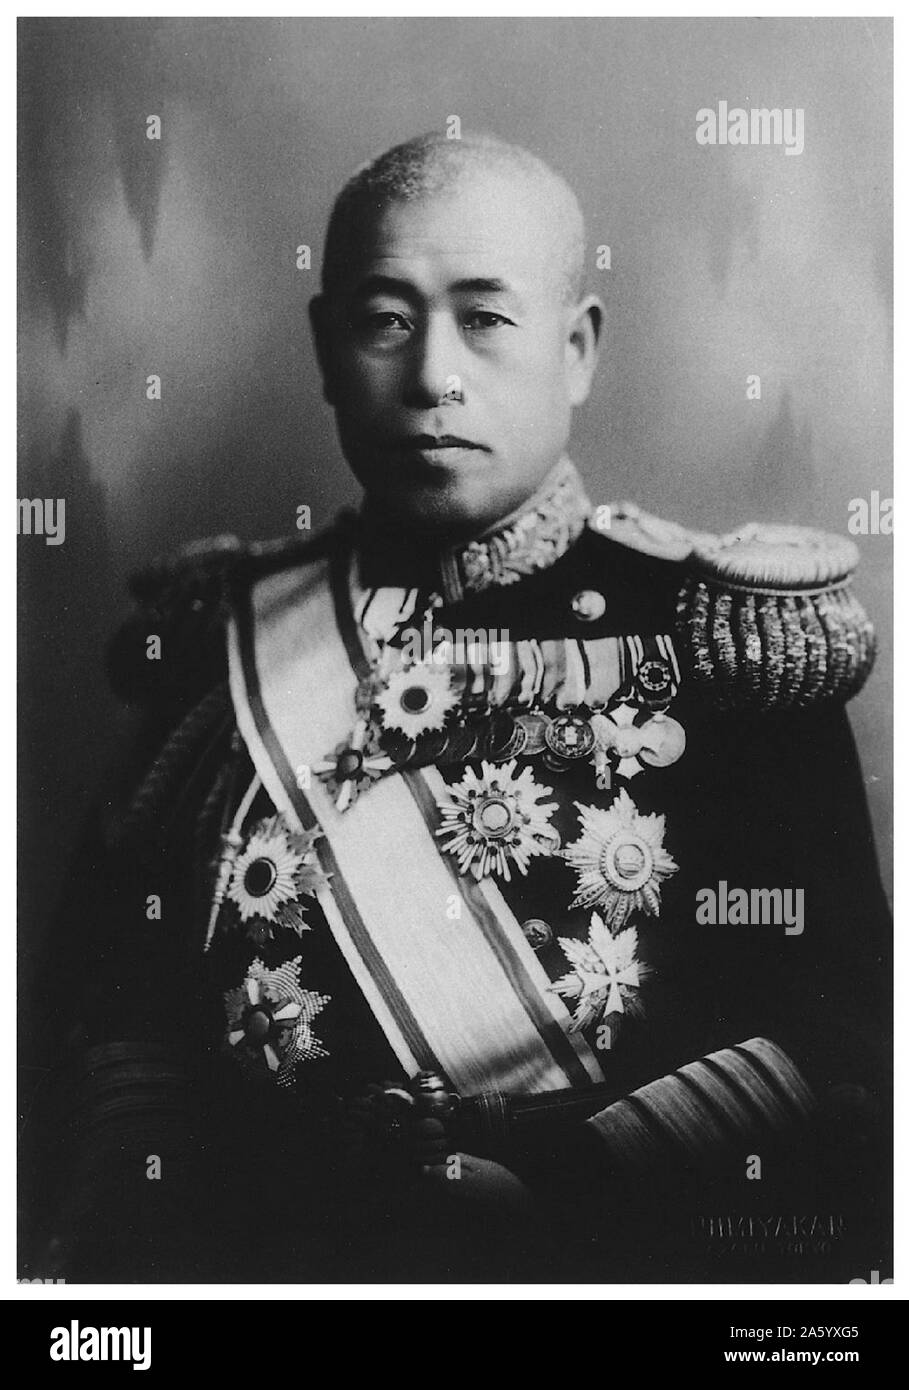 https://c8.alamy.com/comp/2A5YXG5/photograph-of-isoroku-yamamoto-1884-1943-japanese-marshal-admiral-and-the-commander-in-chief-of-the-combined-fleet-during-world-war-ii-dated-1942-2A5YXG5.jpg